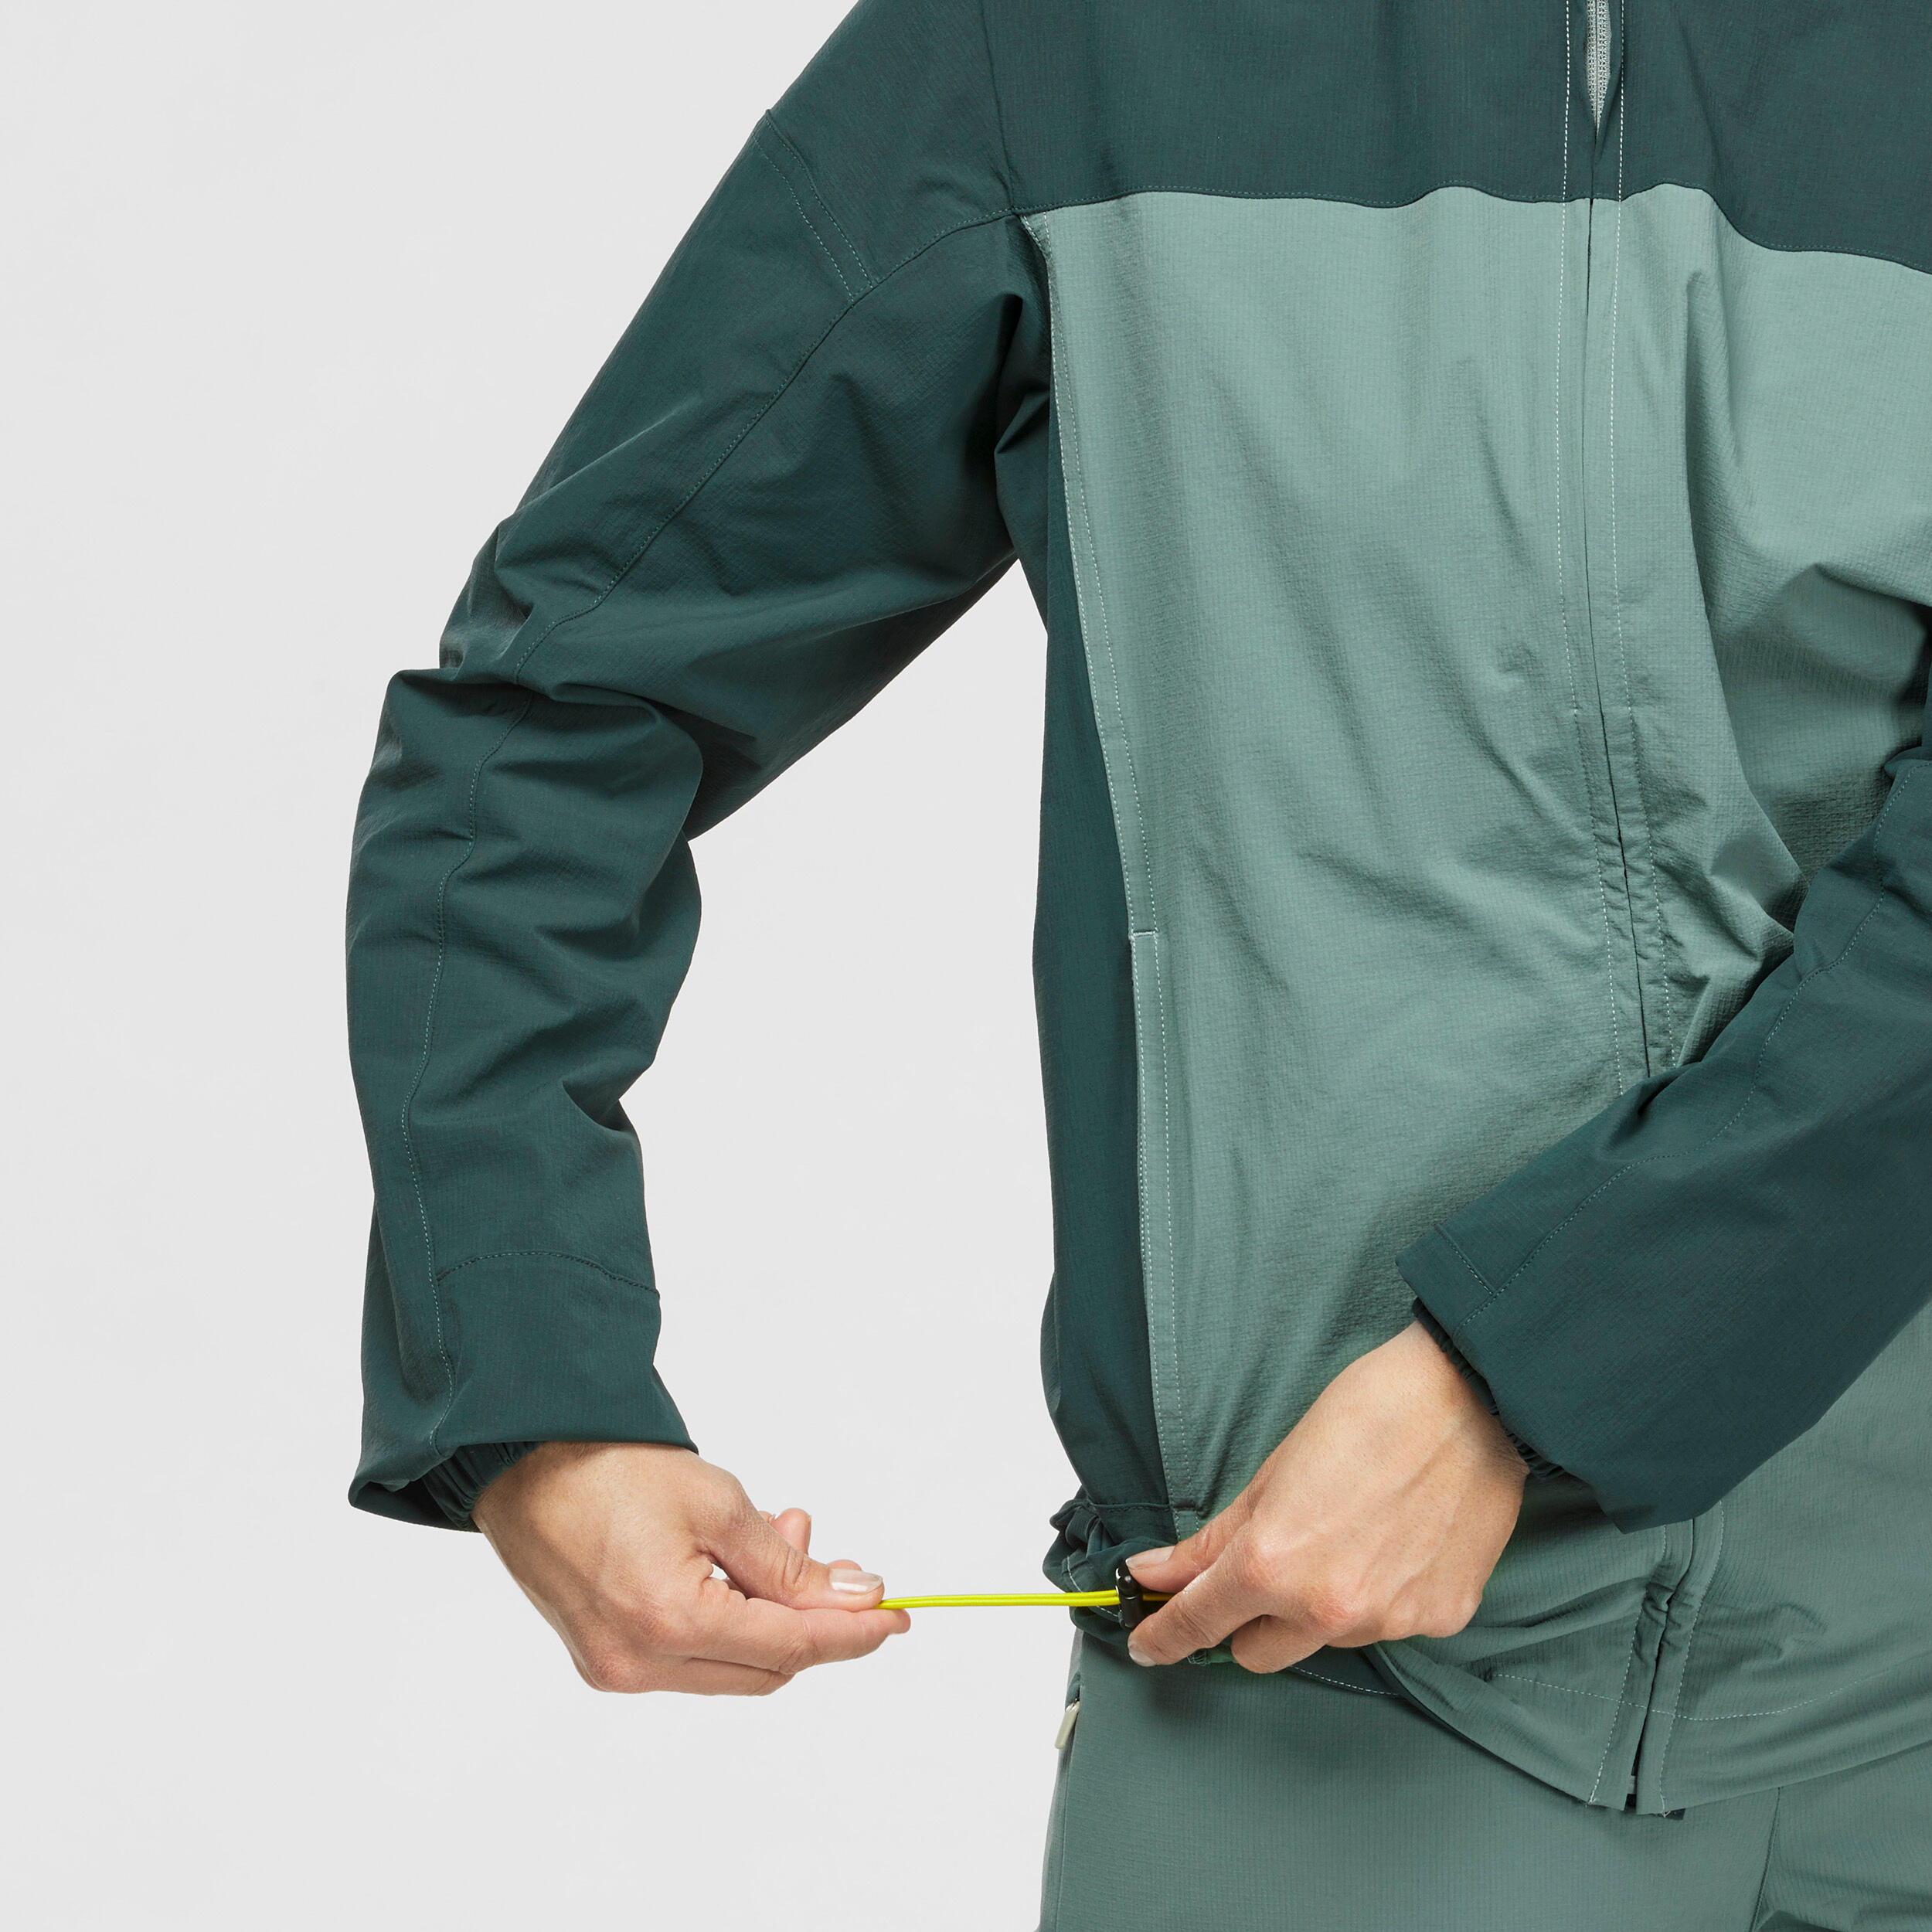 Mosquito Hiking Jacket - Tropic 900 Green - FORCLAZ